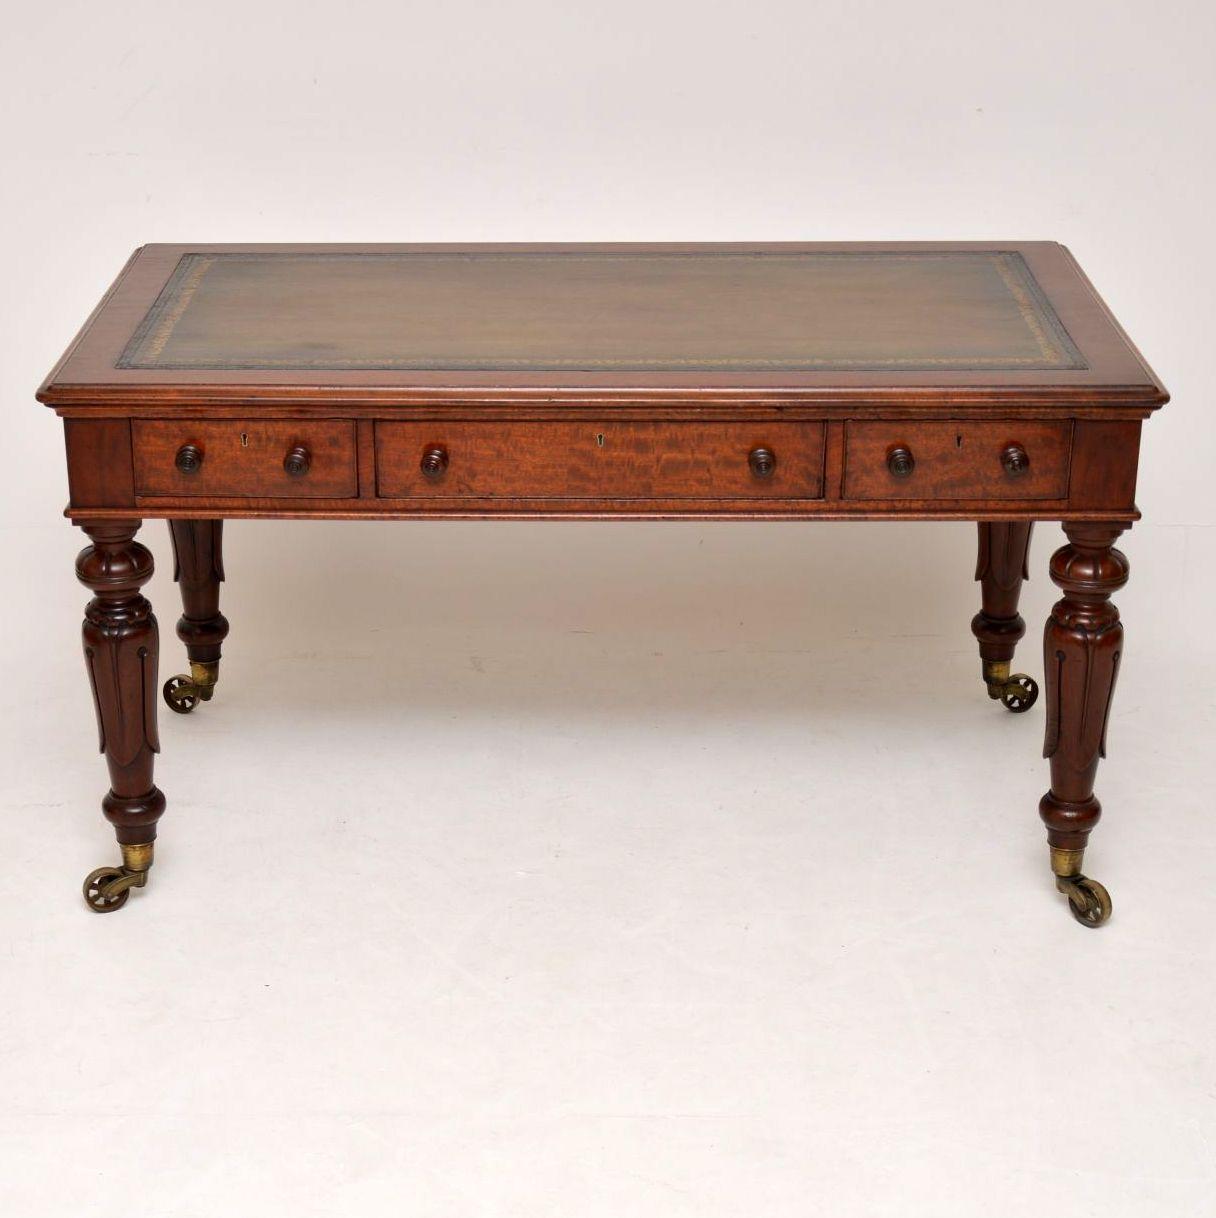 This large antique William IV mahogany writing table is one of the best examples of this sort of thing that I have seen and it has some wonderful features. It has a hand colored tooled leather writing surface with three drawers below and a polished